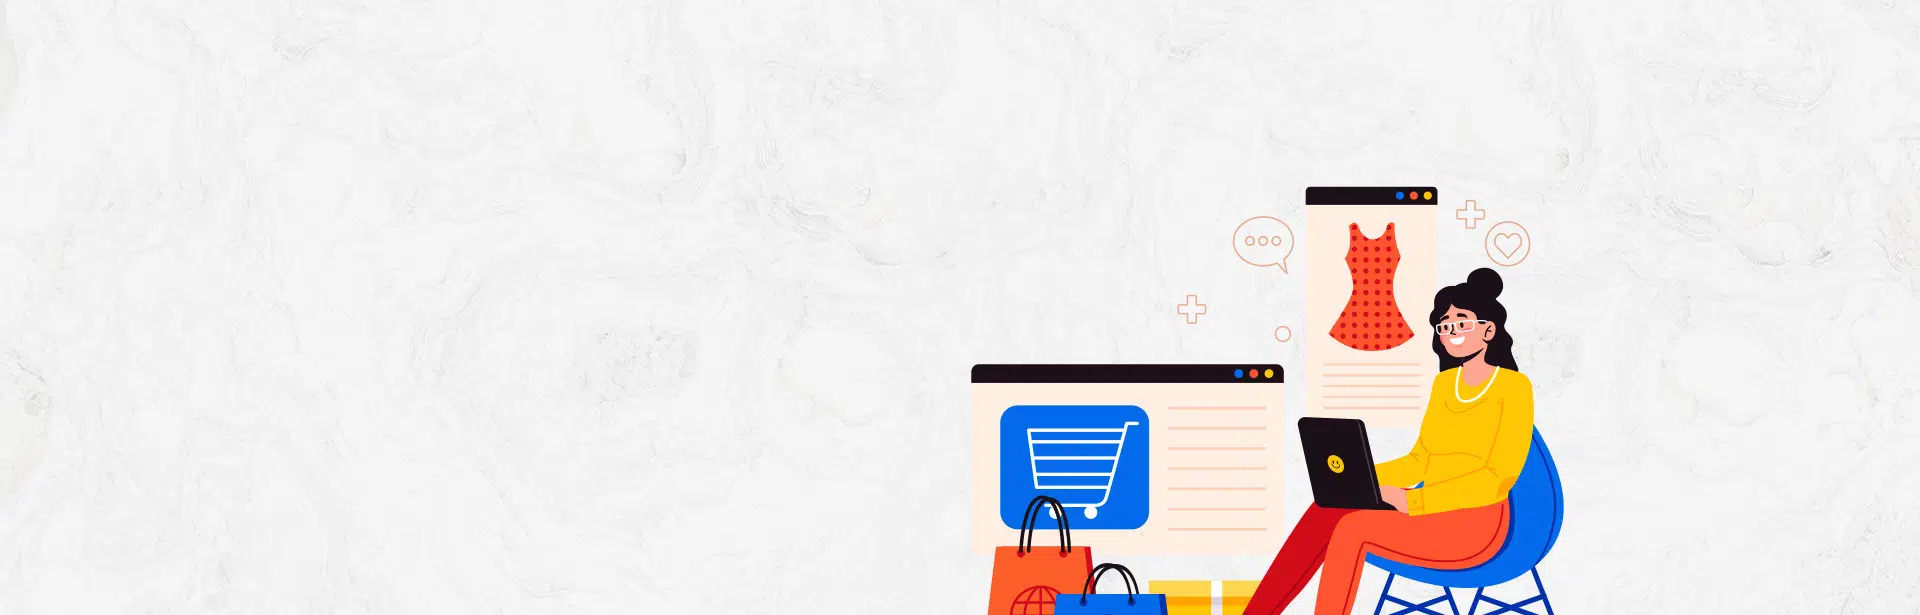 11 Ecommerce Marketing Trends You Need to Know in 2023